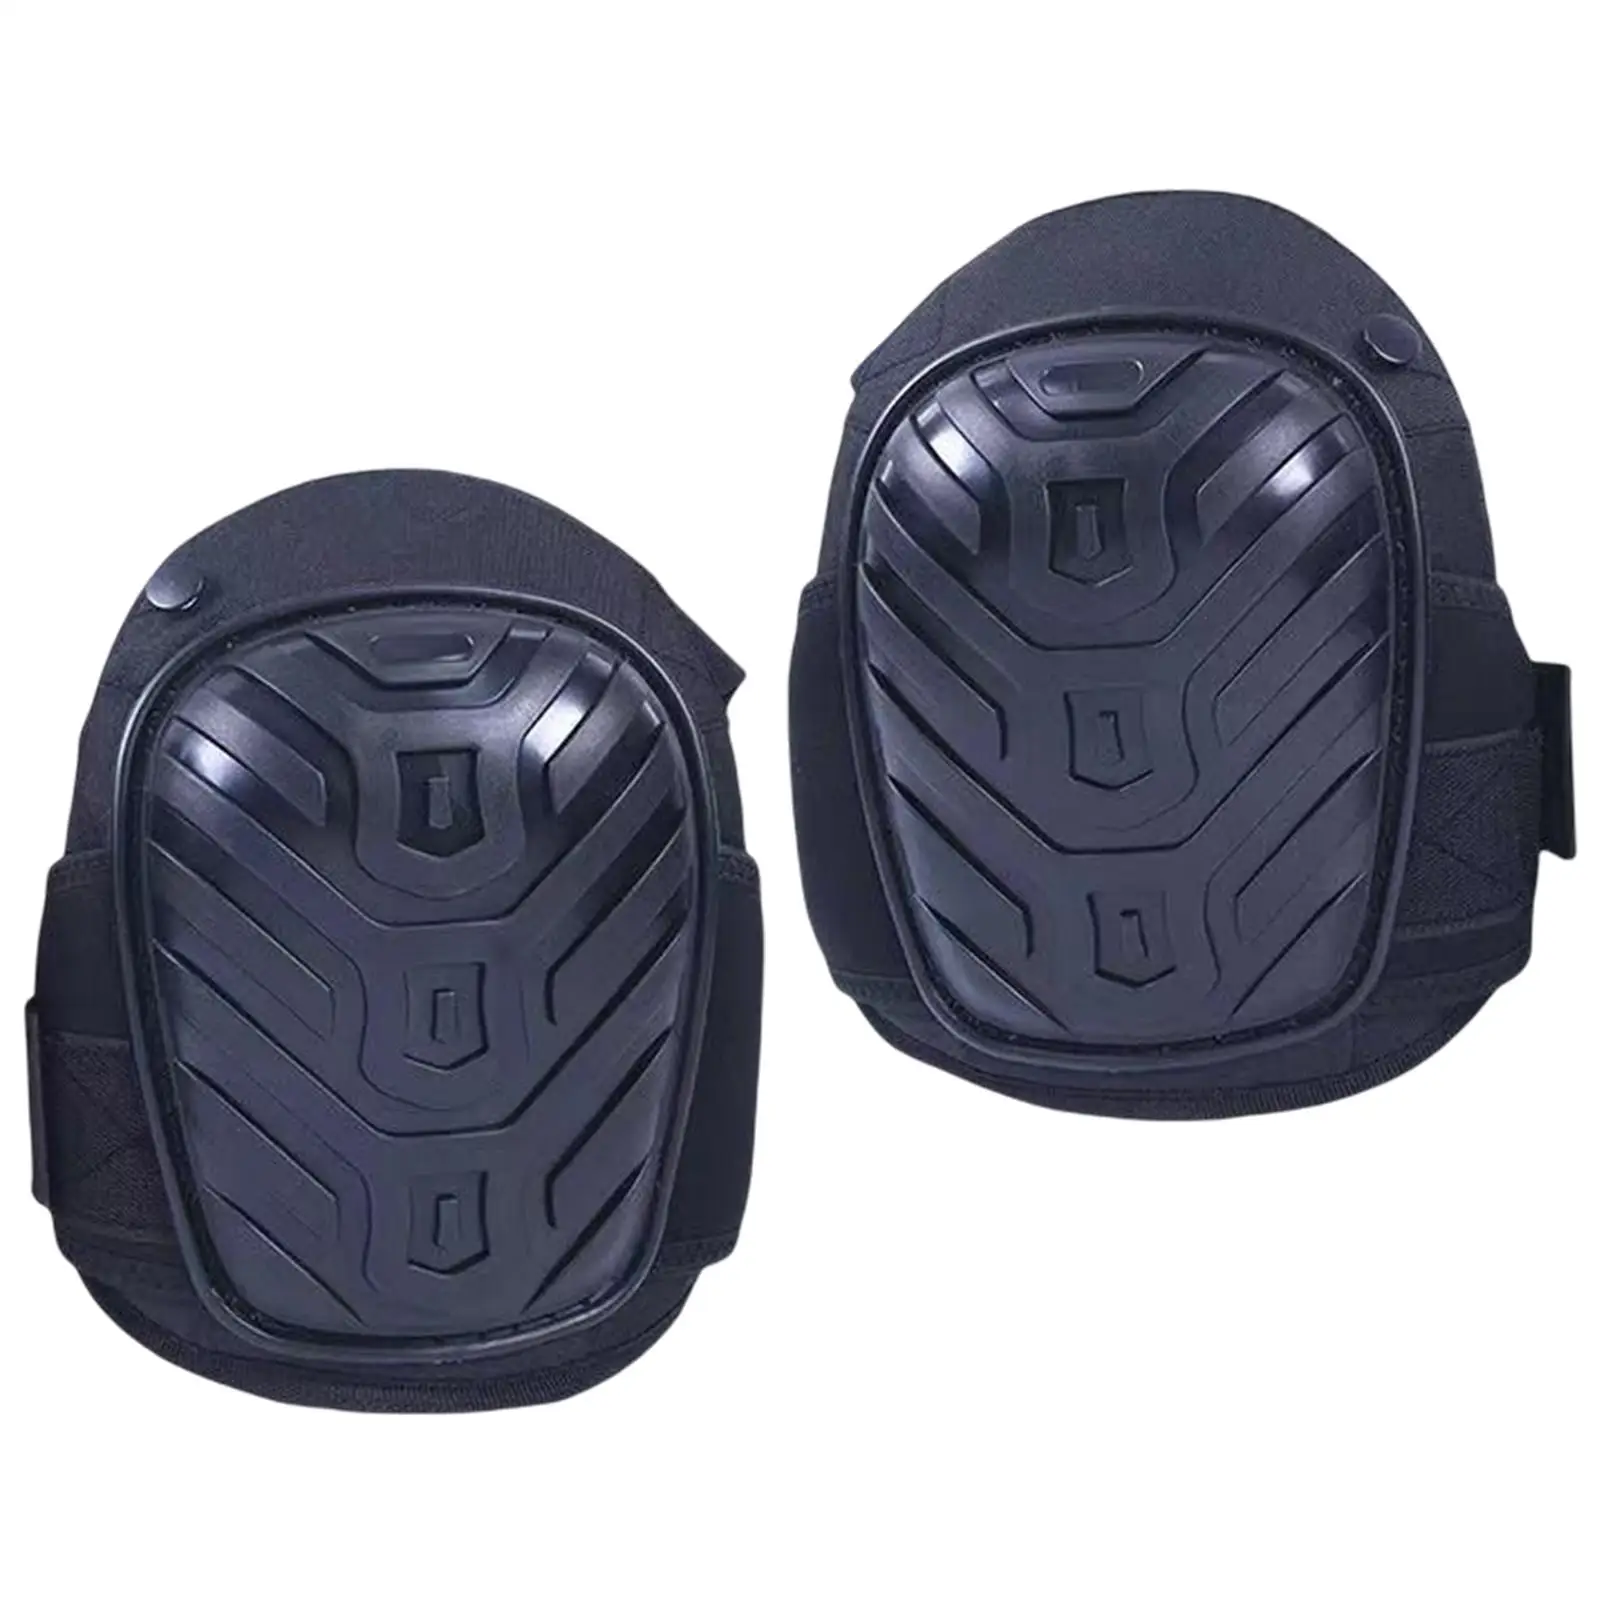 Knee Pads Guards Comfortable Adjustable Protection Insurance Protective Gear Labor Black Safety for Skateboarding Sports Biking